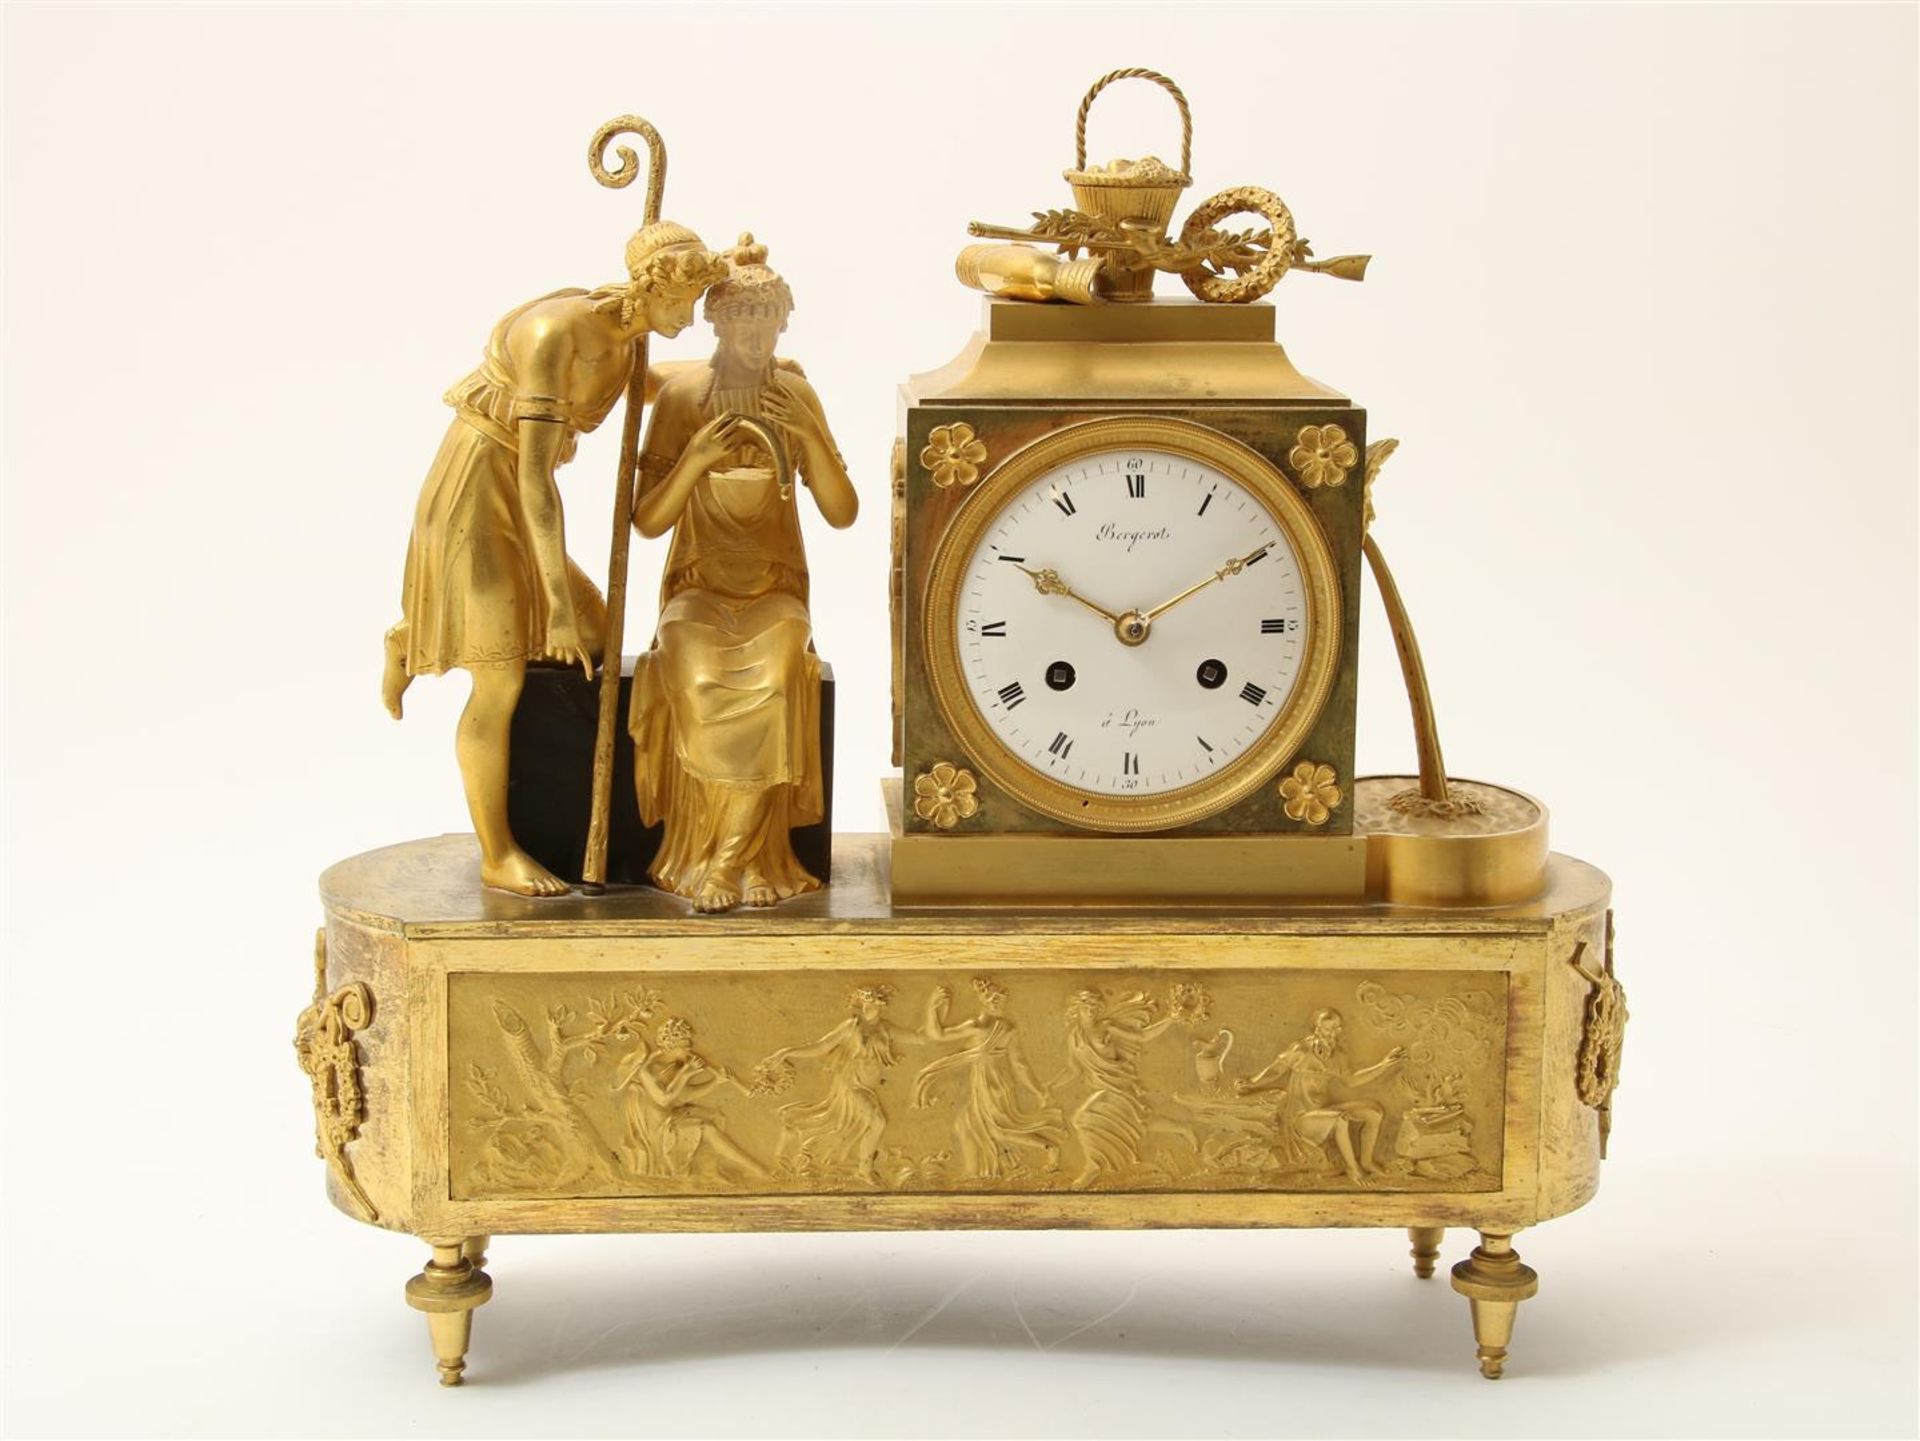 Ormolu bronze Empire mantel clock, crowned with shepherd with staff and shepherdess with pan - Image 2 of 9